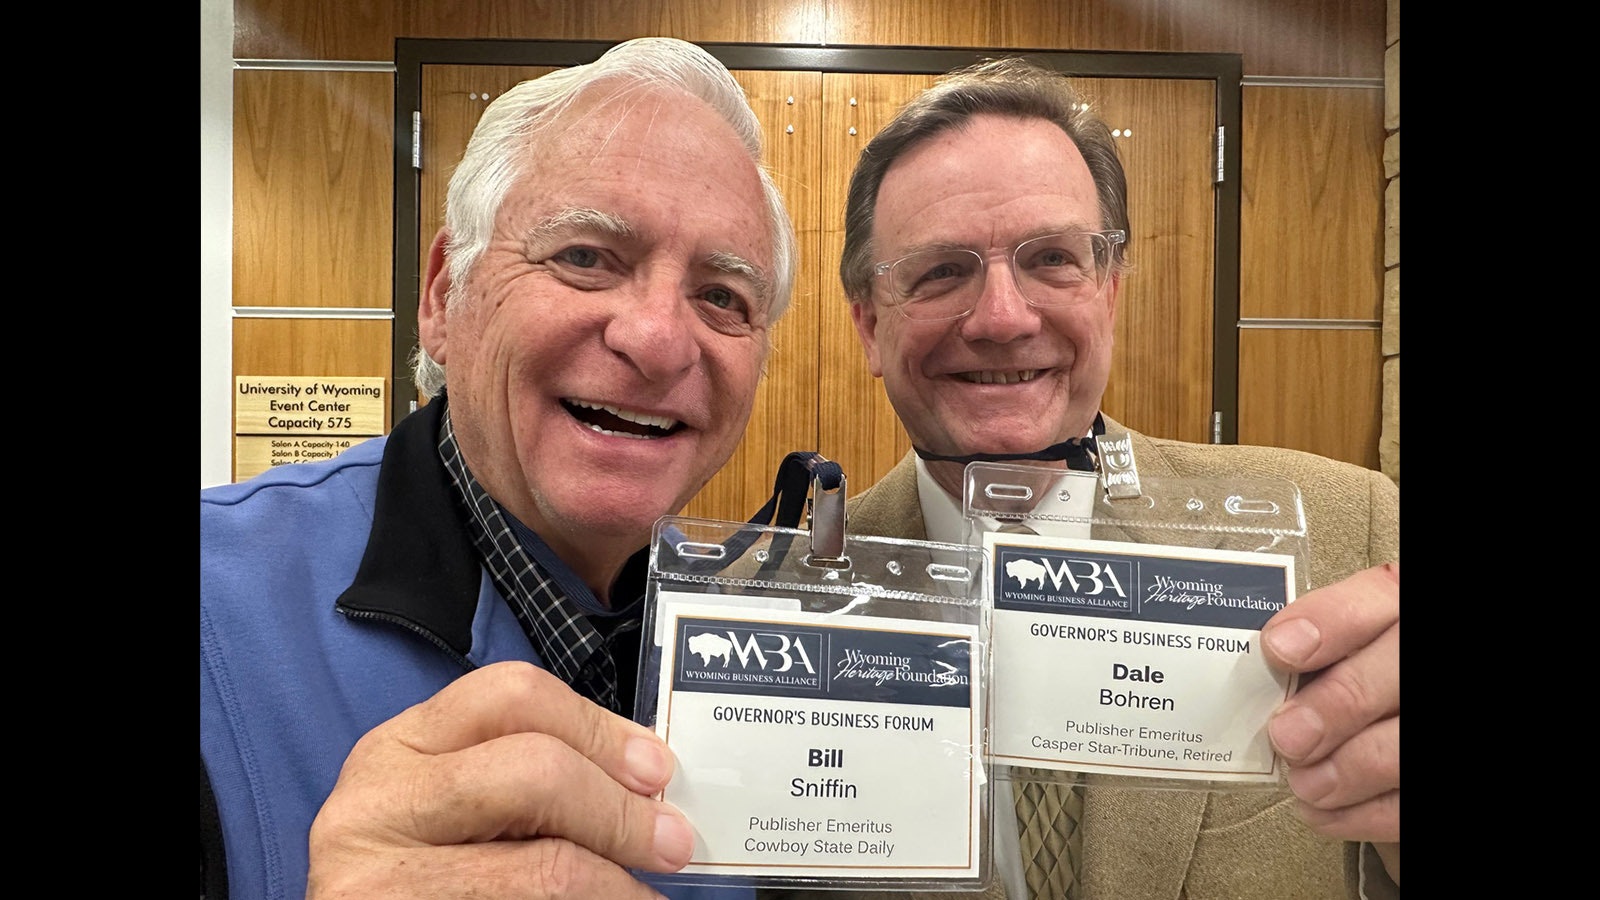 The only two people with the title “Publisher Emeritus” on their name badges were Columnist Bill Sniffin, left, of Cowboy State Daily and Dale Bohren of Casper, publisher emeritus of the Casper Star-Tribune.